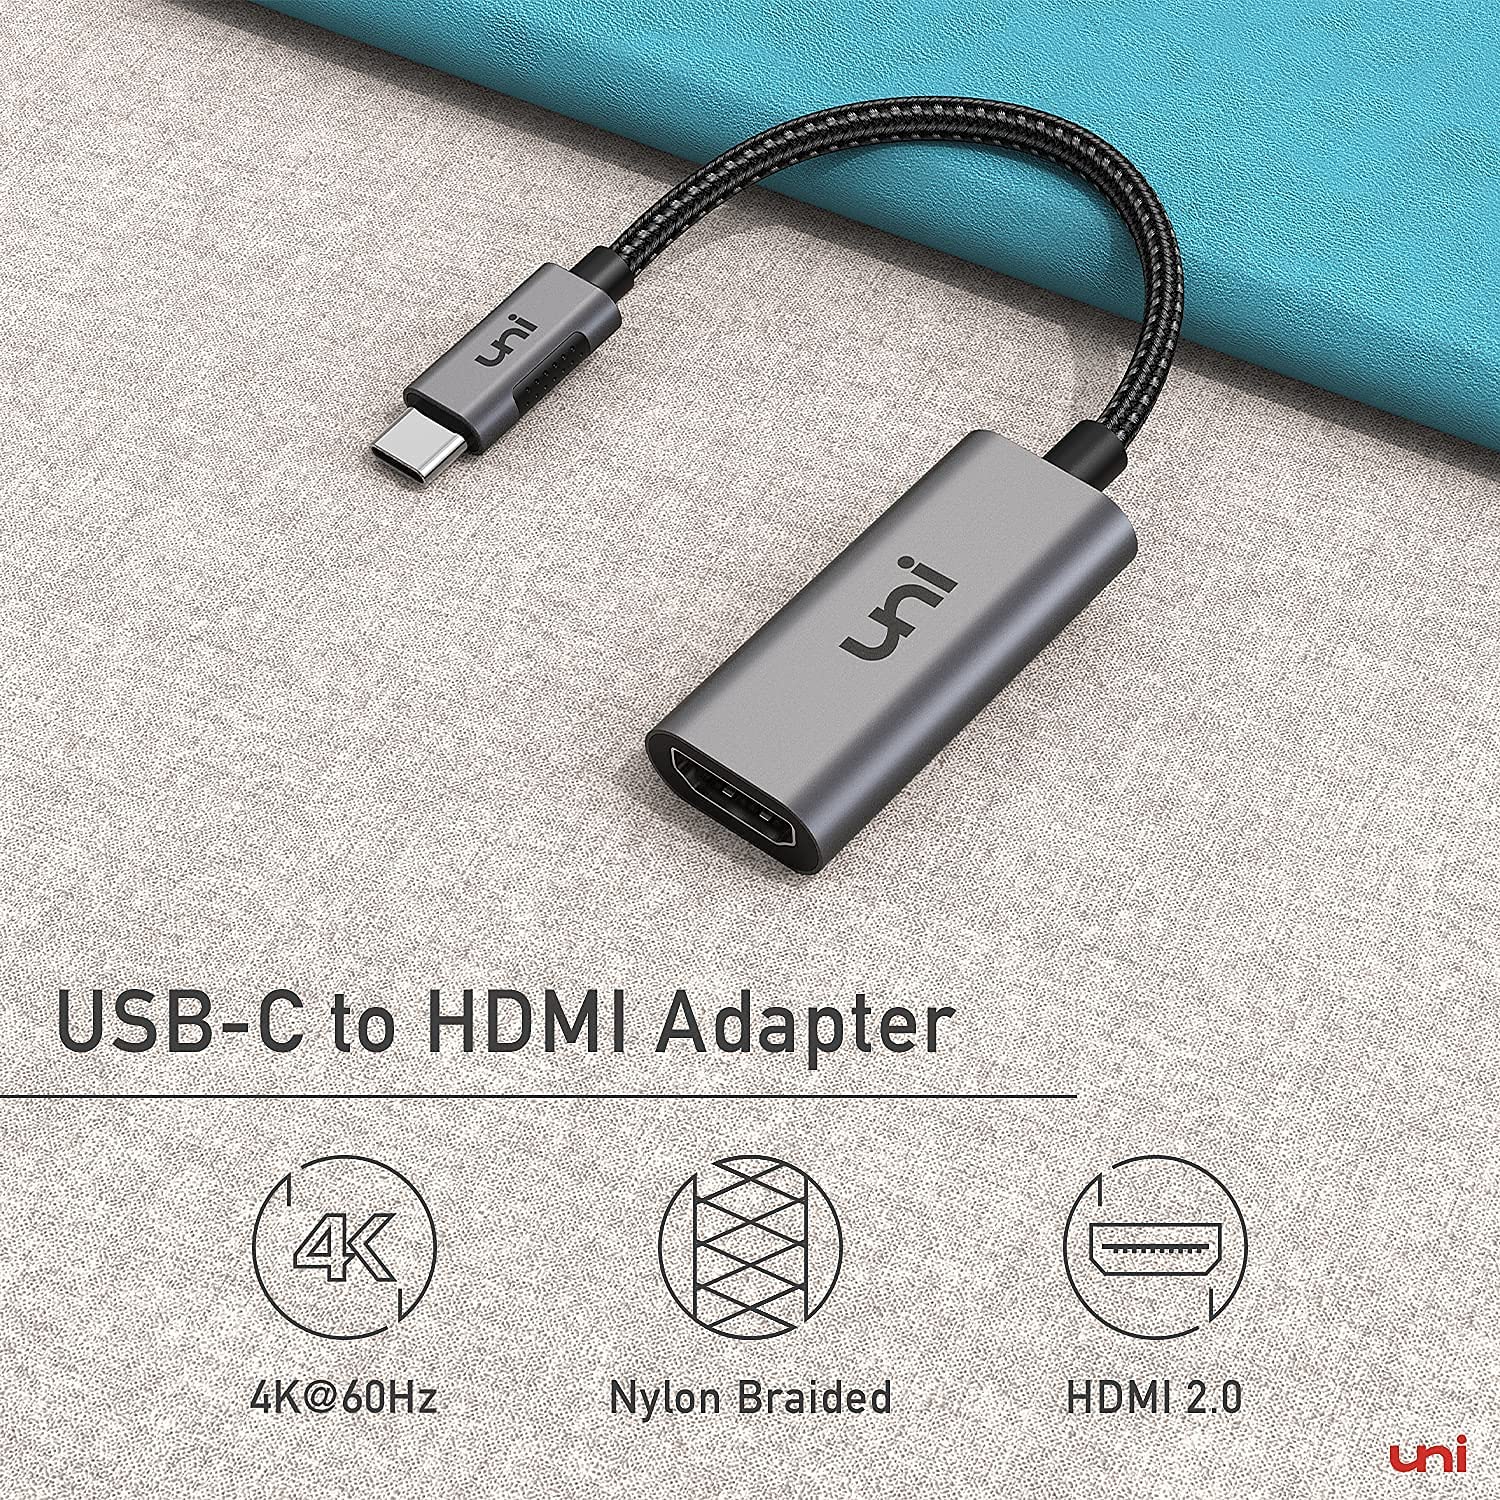 uni USB-C to HDMI Adapter 4K@60Hz, Thunderbolt 4/3 to HDMI Adapter, HDMI to USB-C Adapter, Compatible with MacBook Pro 2023/Air 2022, iPad Pro/Air 5, XPS, Surface Laptops, Chromebook & More